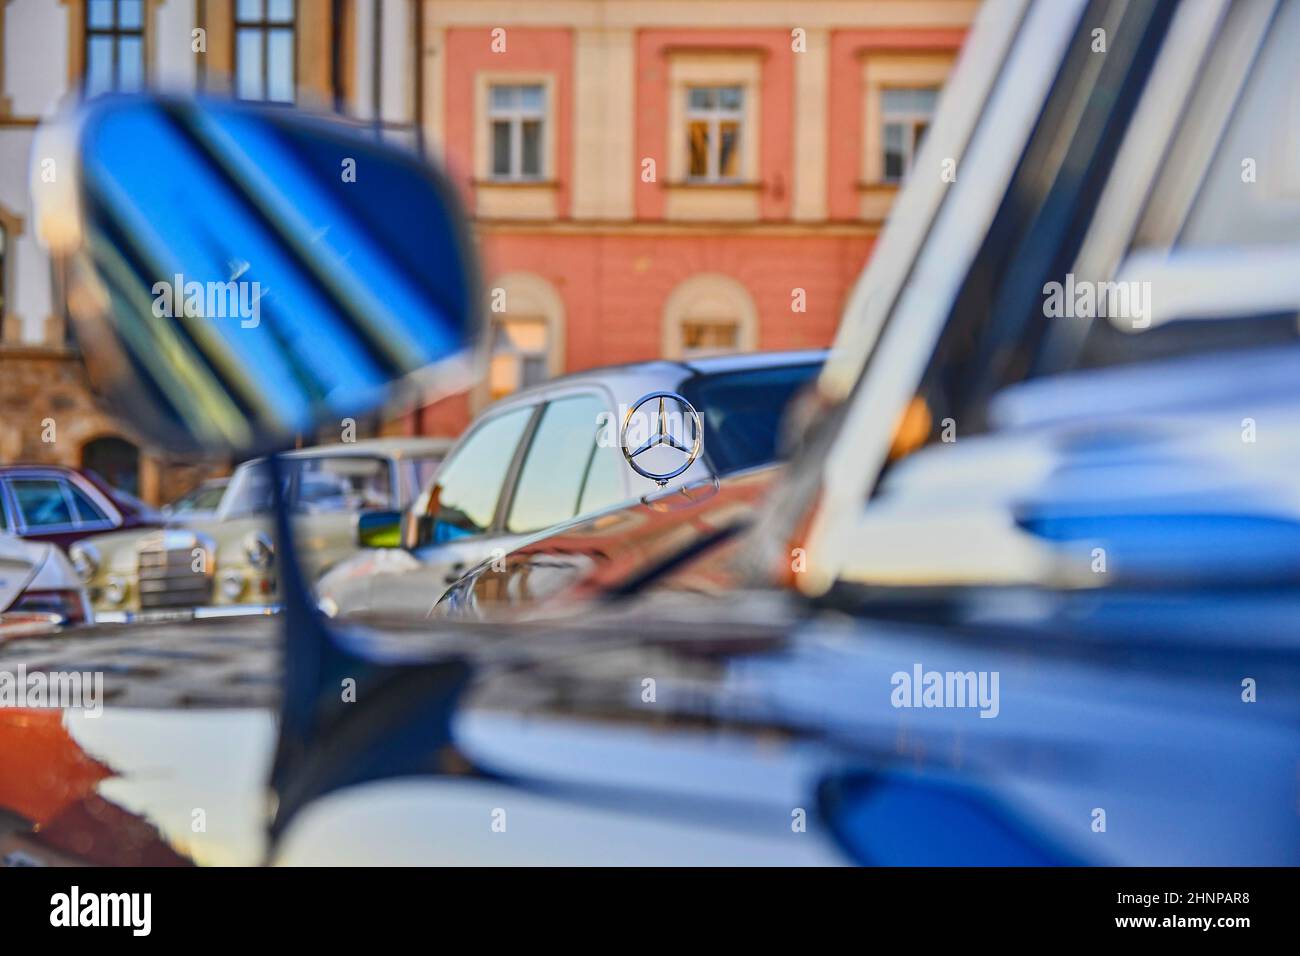 Mercedes Benz logo on vintage car. Mercedes-Benz is a German automobile manufacturer. The brand is used for luxury automobiles, buses, coaches and trucks. Stock Photo